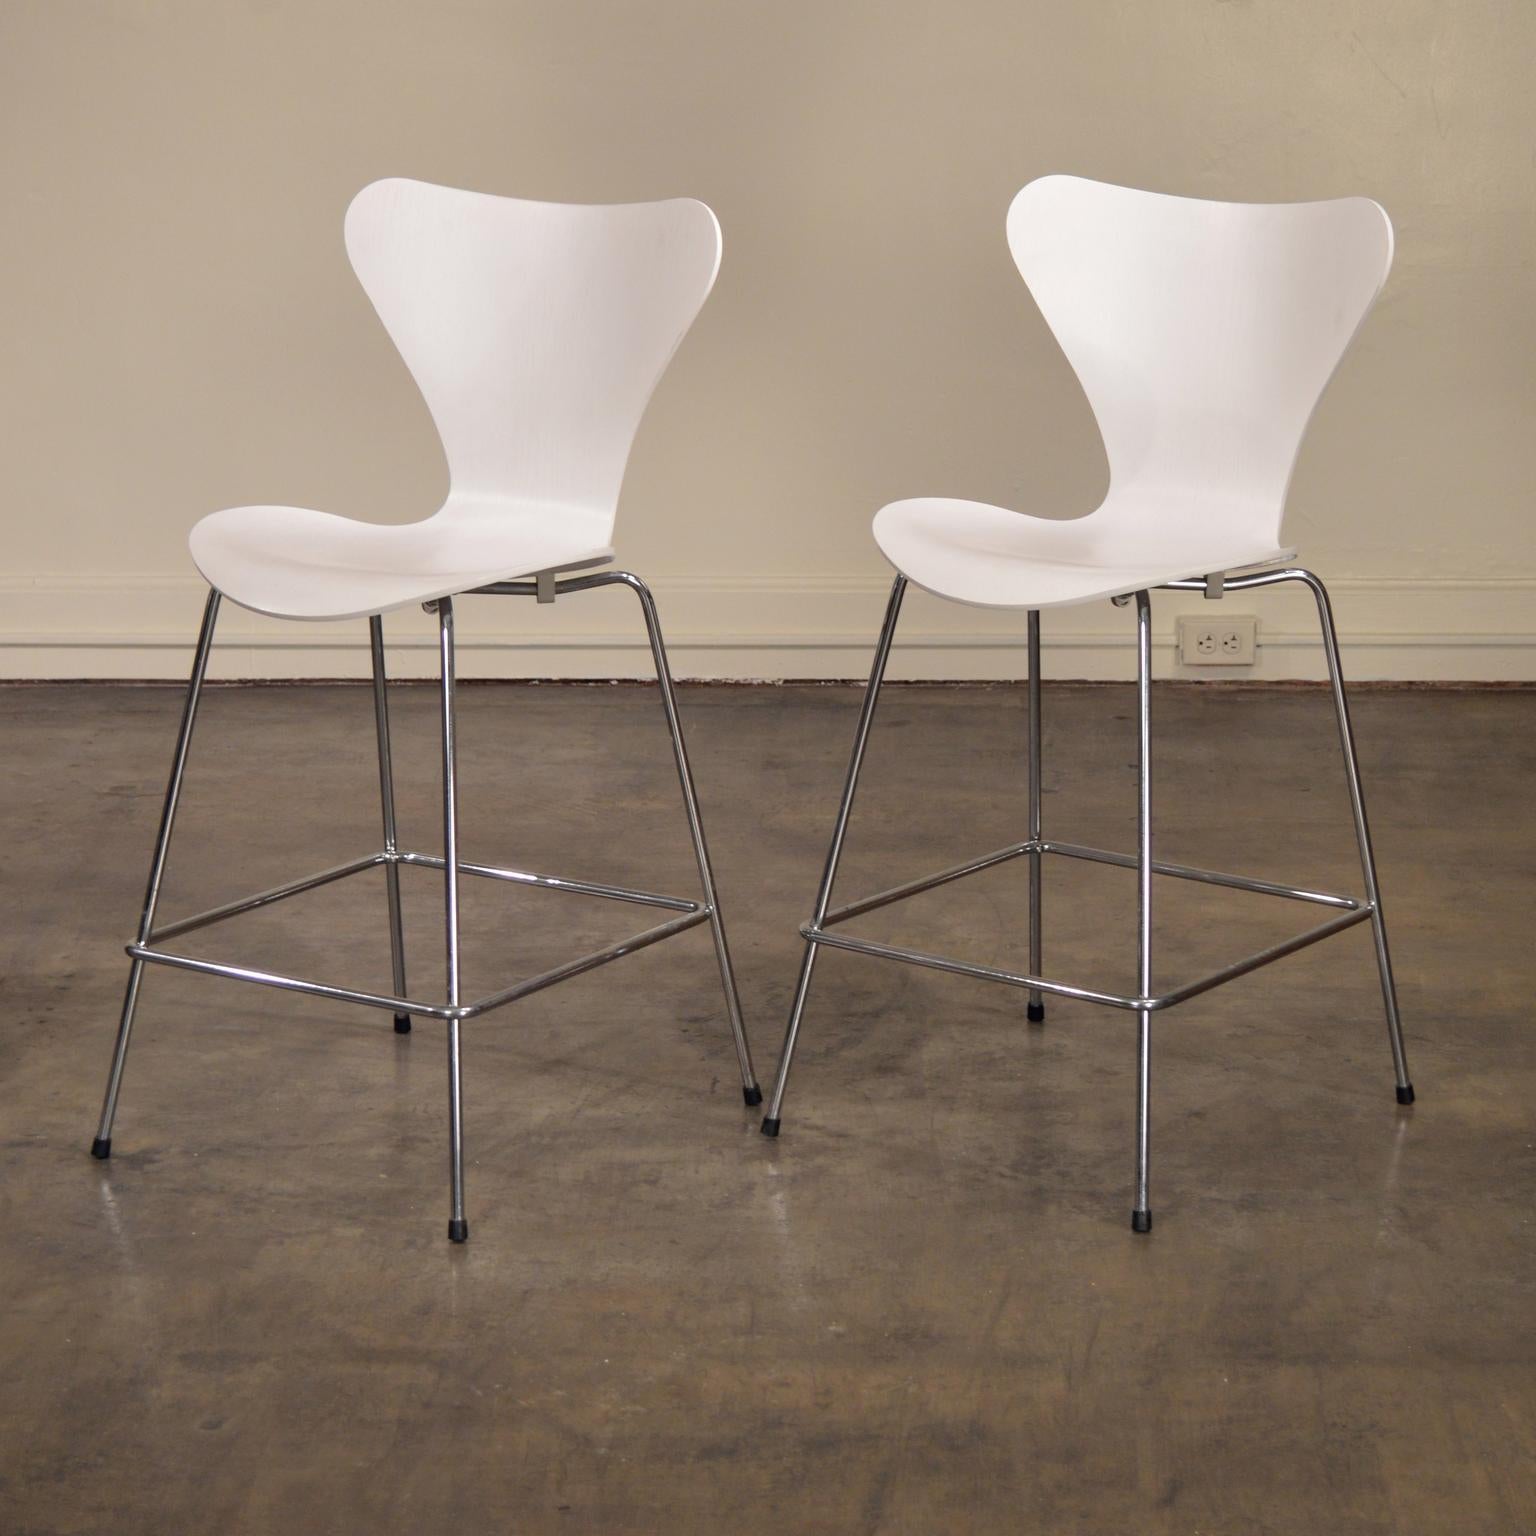 Series 7 bar stools with 26